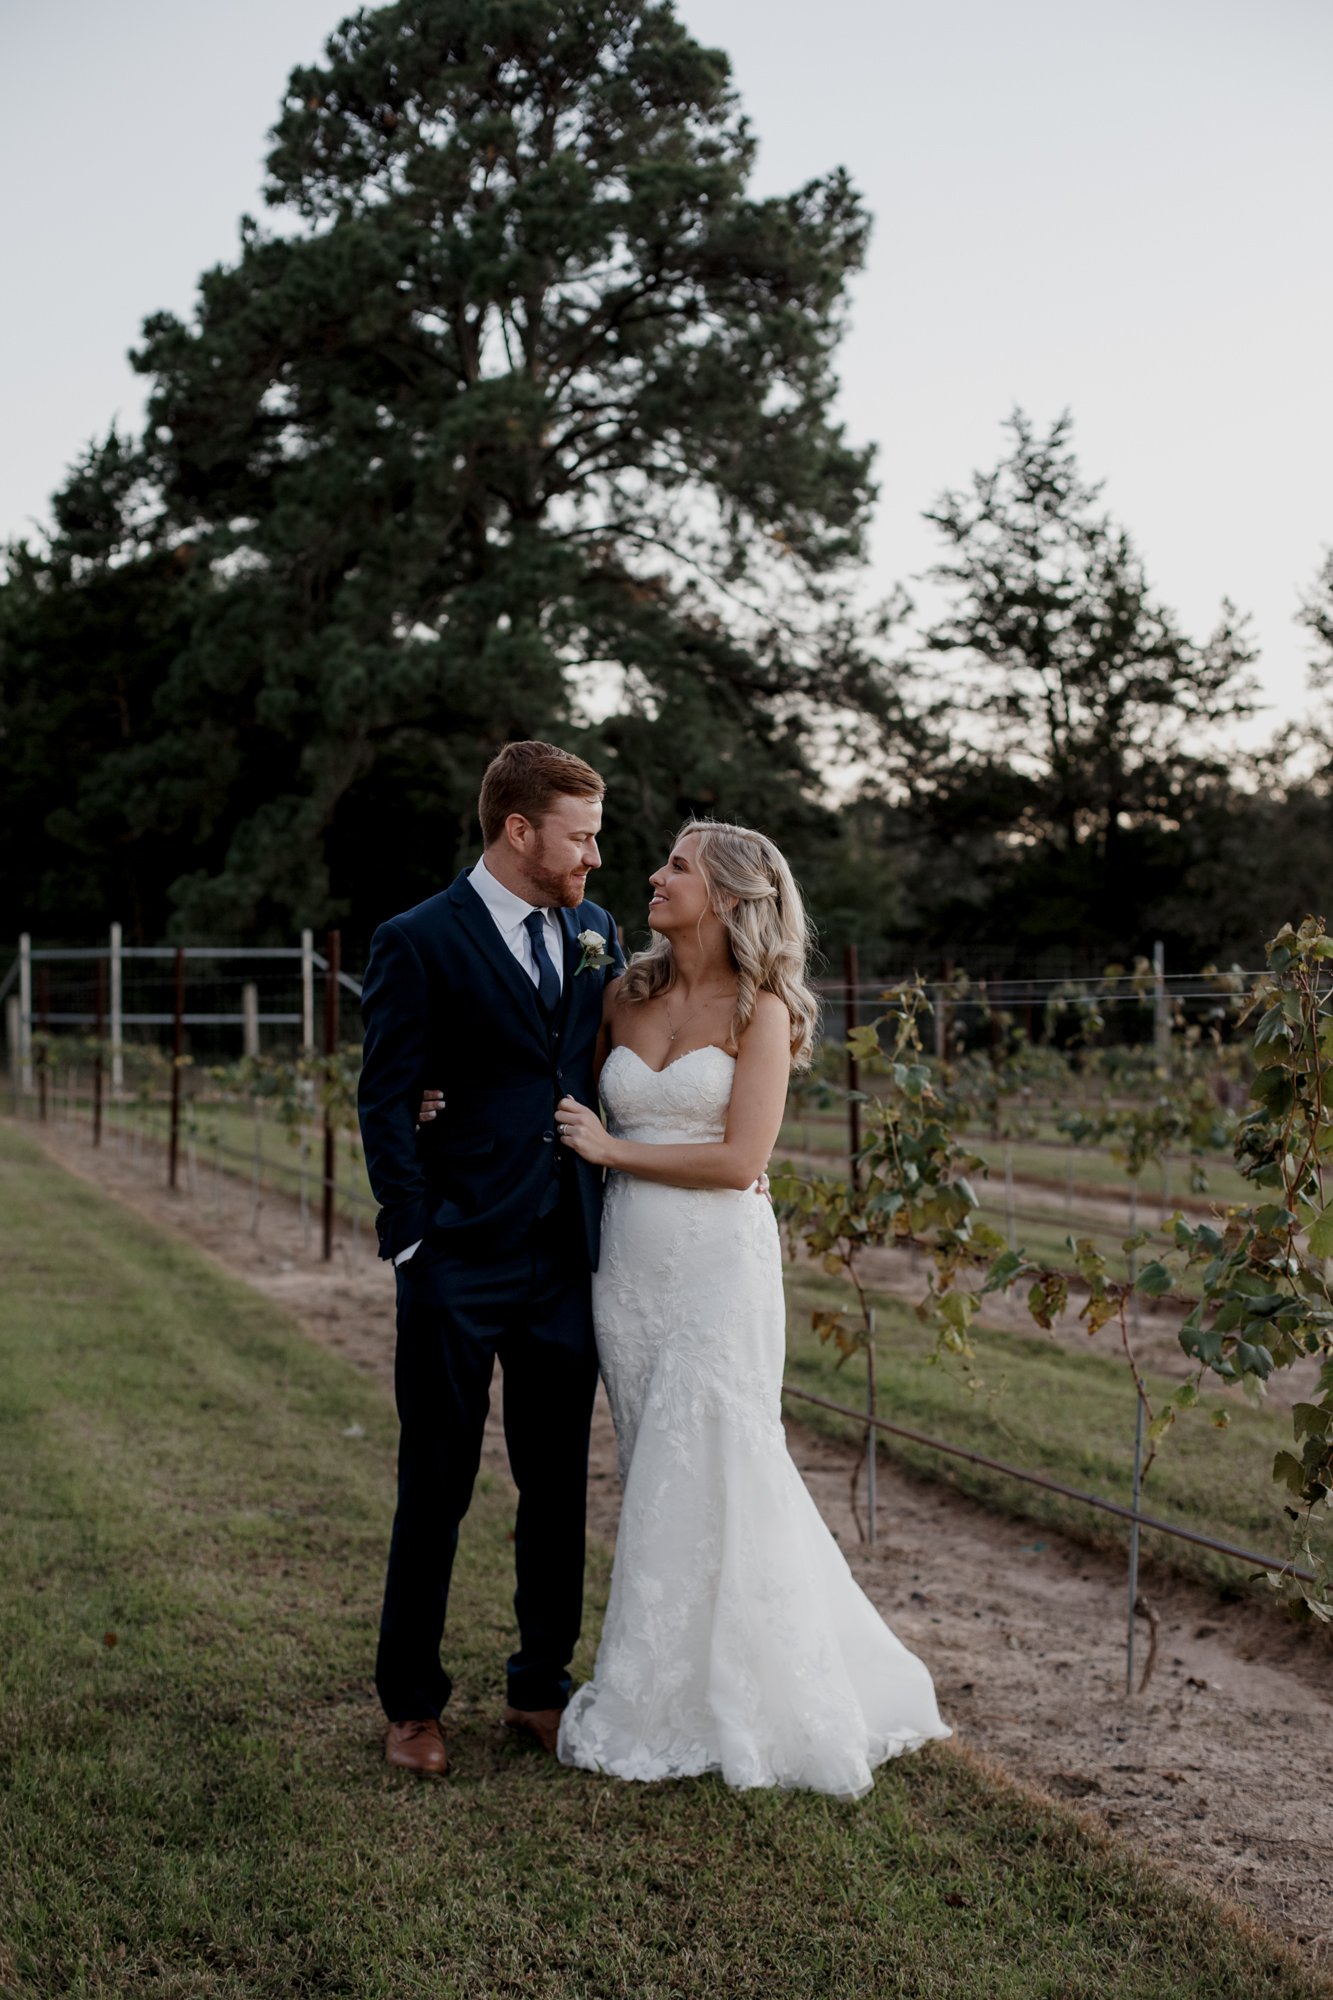 Bride and groom at the winery. Wedding at The Vine (New Ulm, TX)